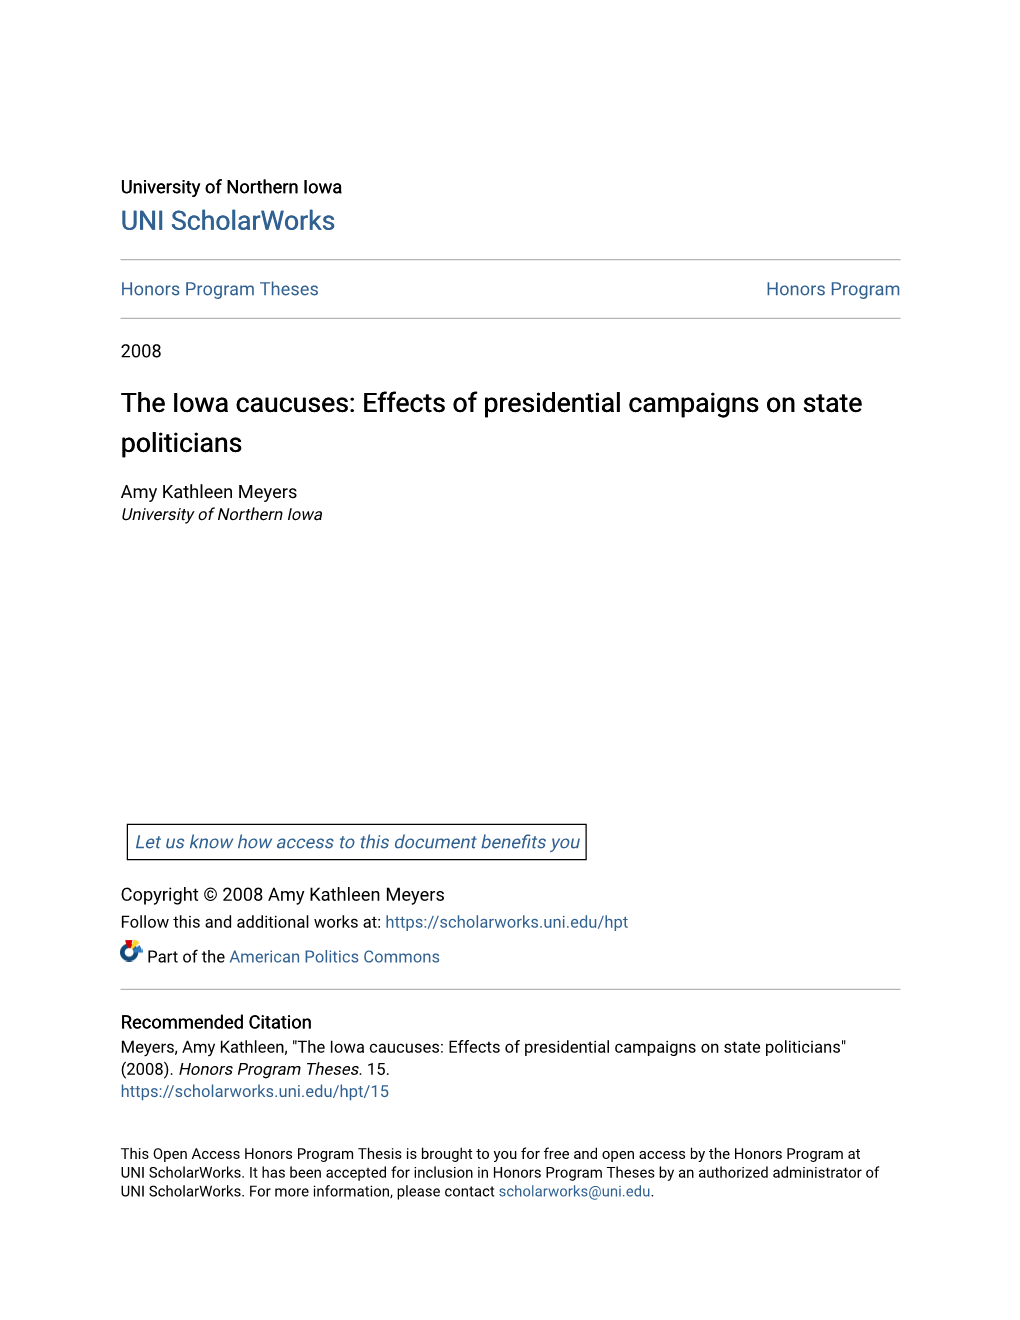 The Iowa Caucuses: Effects of Presidential Campaigns on State Politicians